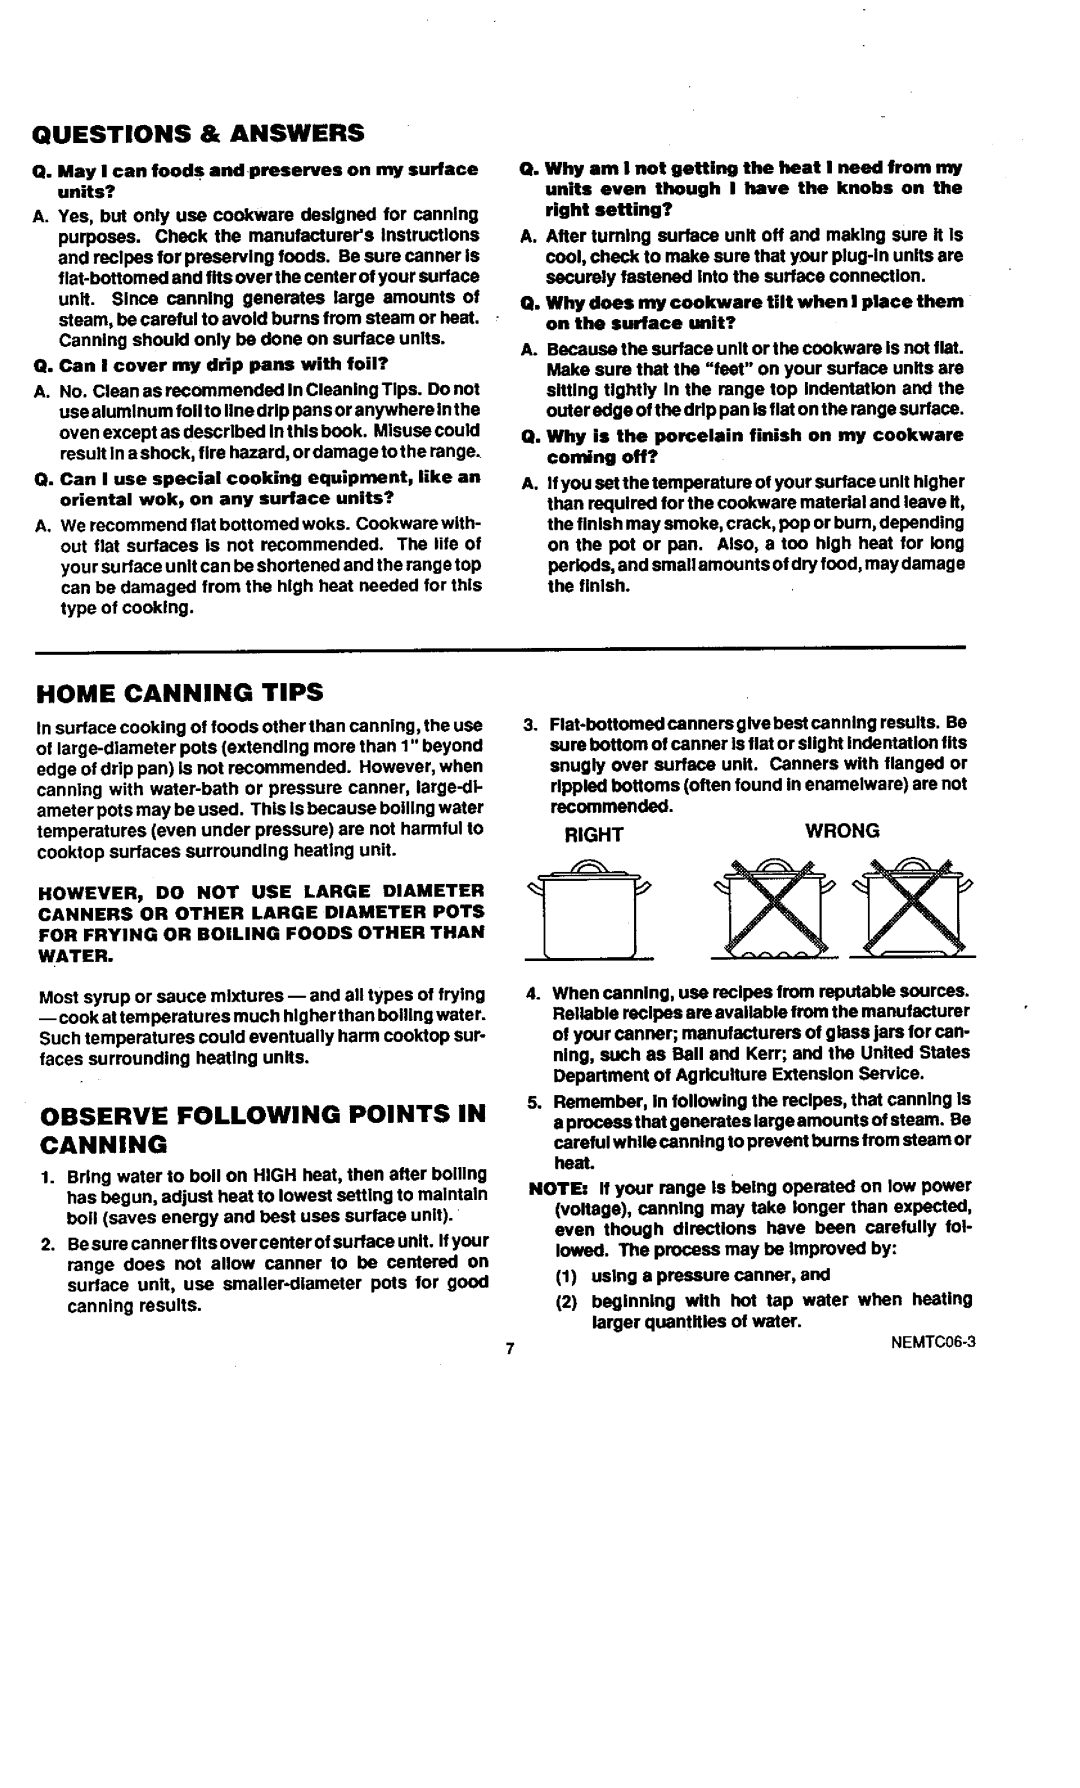 Sears 45521, 45520 warranty Home Canning Tips, Answers, Observe Following Points In Canning, Questions 